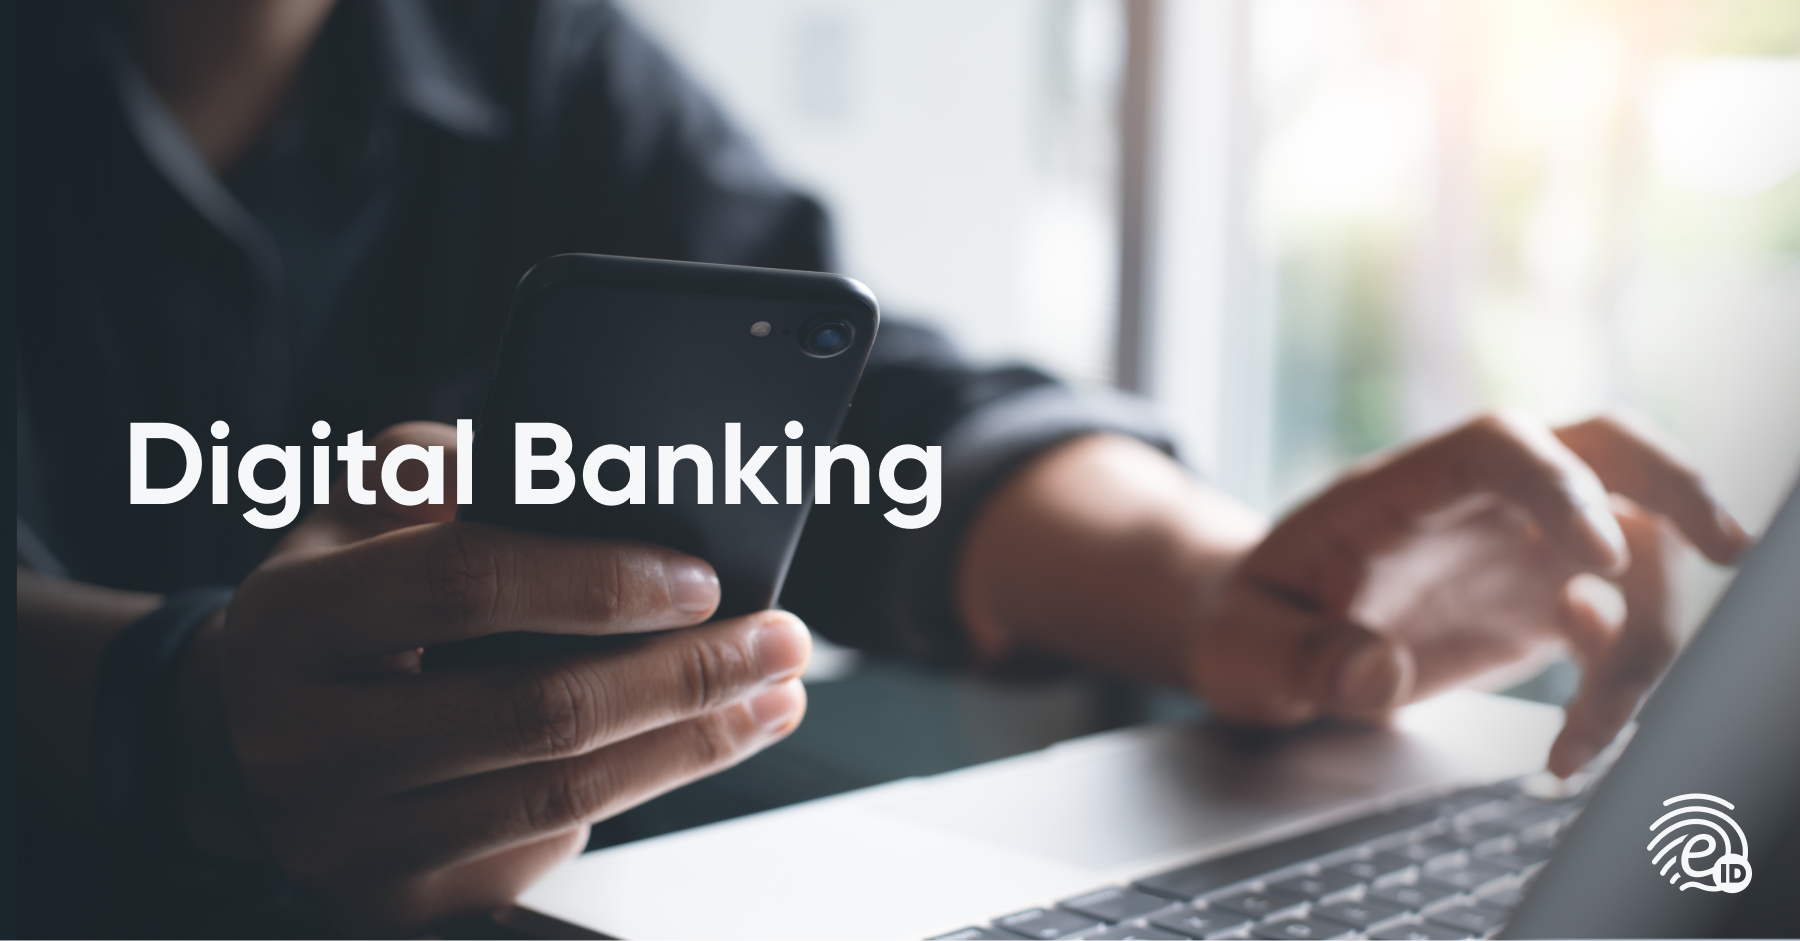 Digital banking: the brightest future of traditional banks